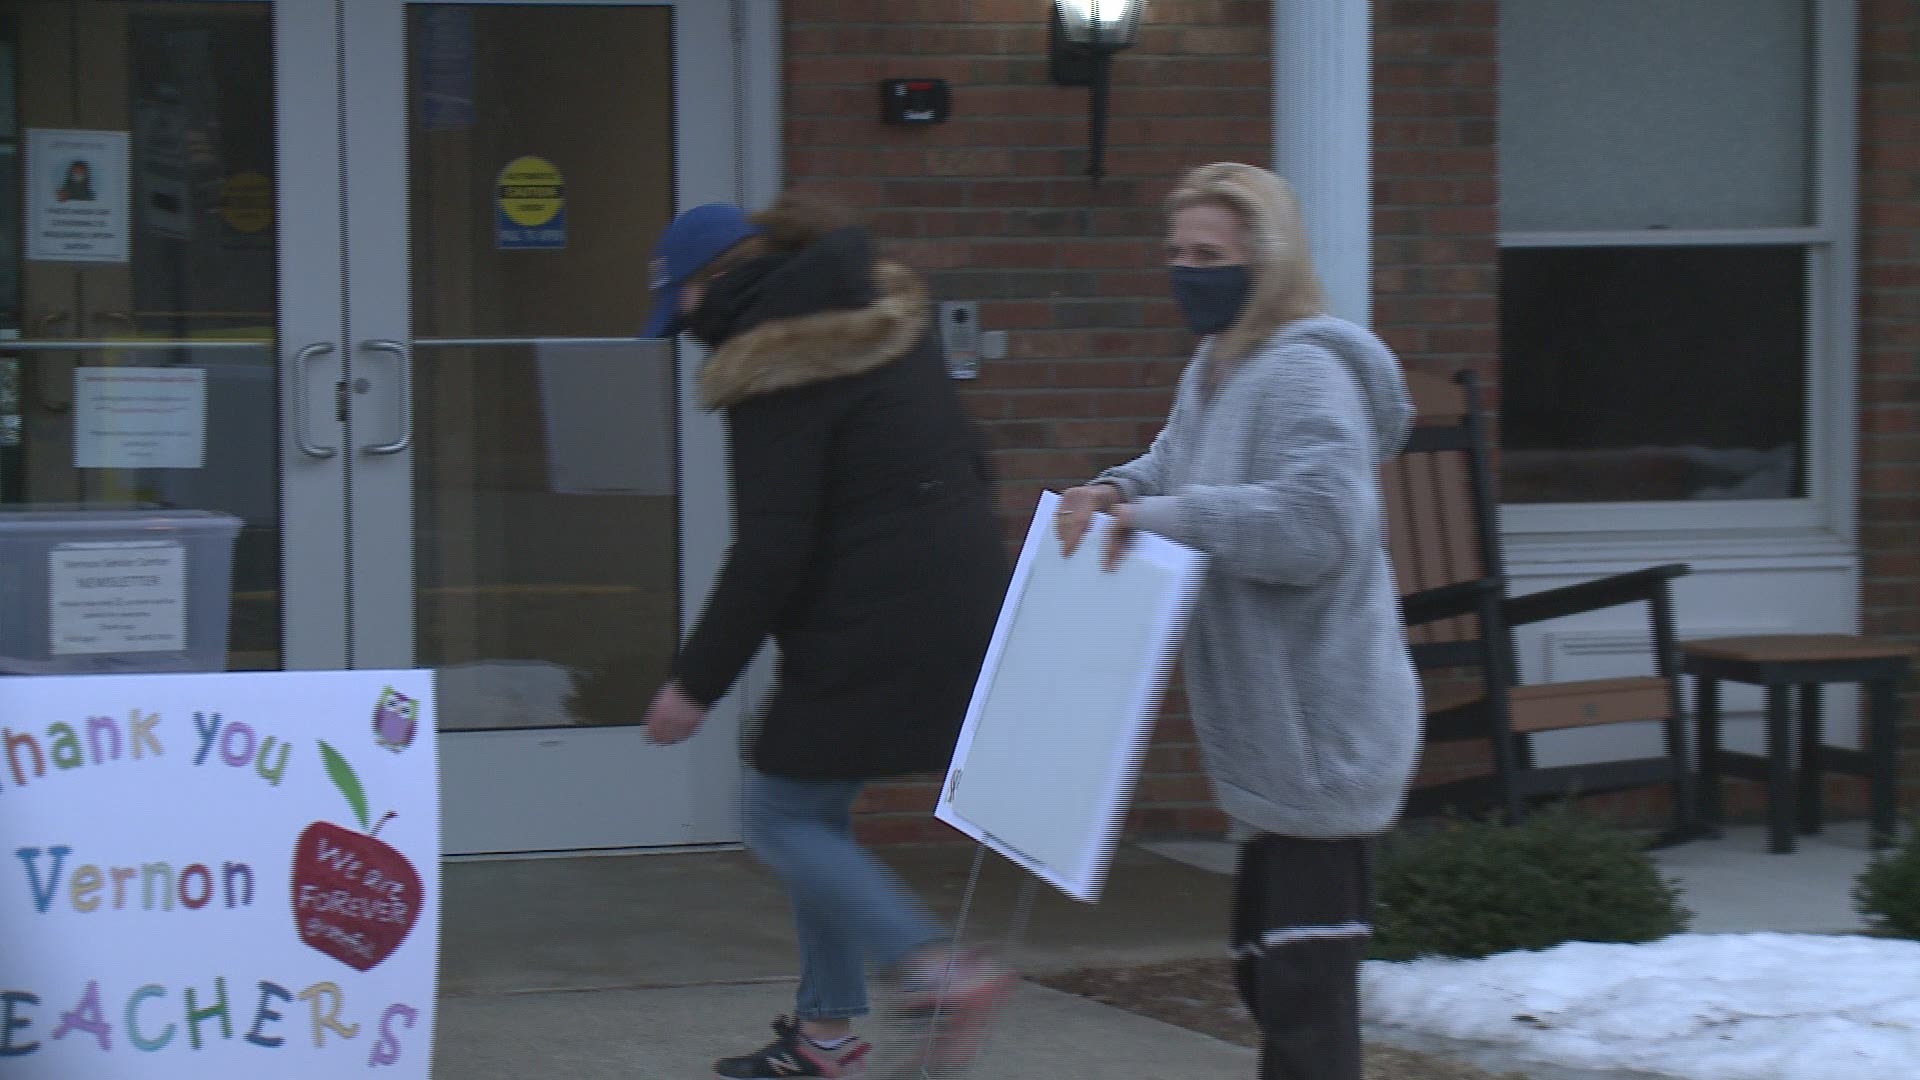 The community kindness came as Vernon launched an all-day effort to vaccinate more than 500 school teachers and staffers.